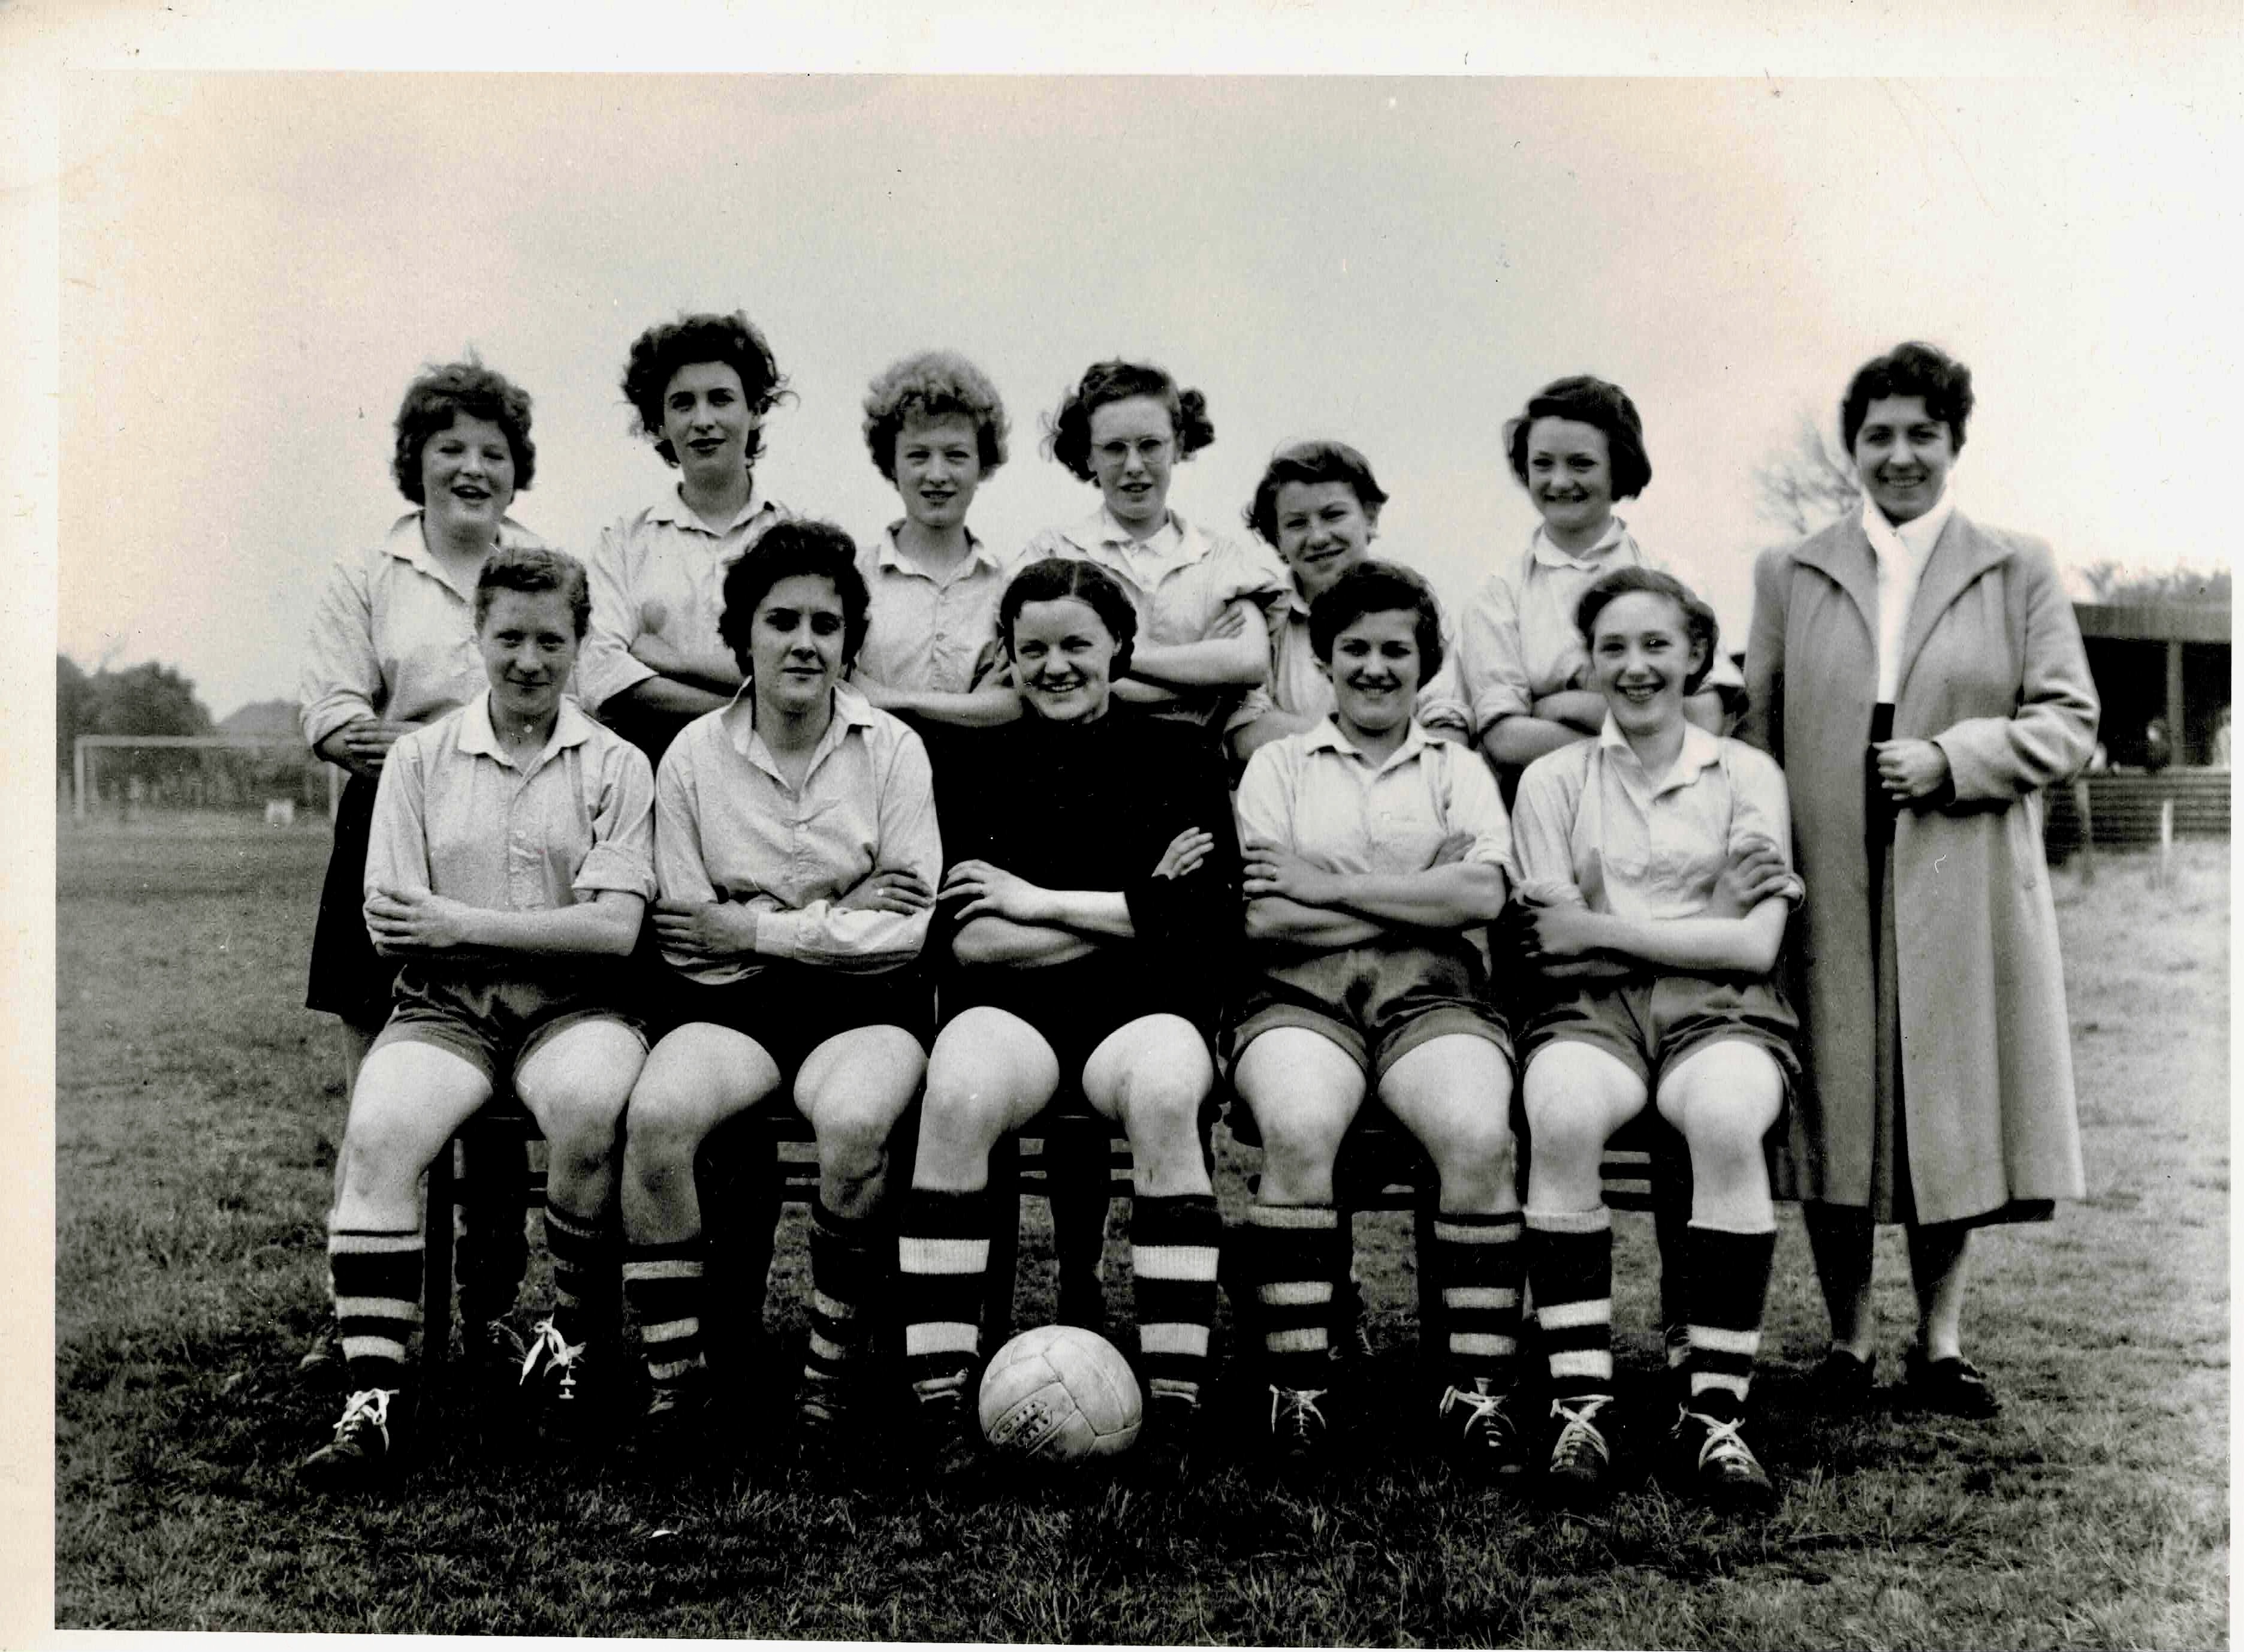 Betty Sugden in goalkeeping kit for what may have been South Yorkshire Ladies